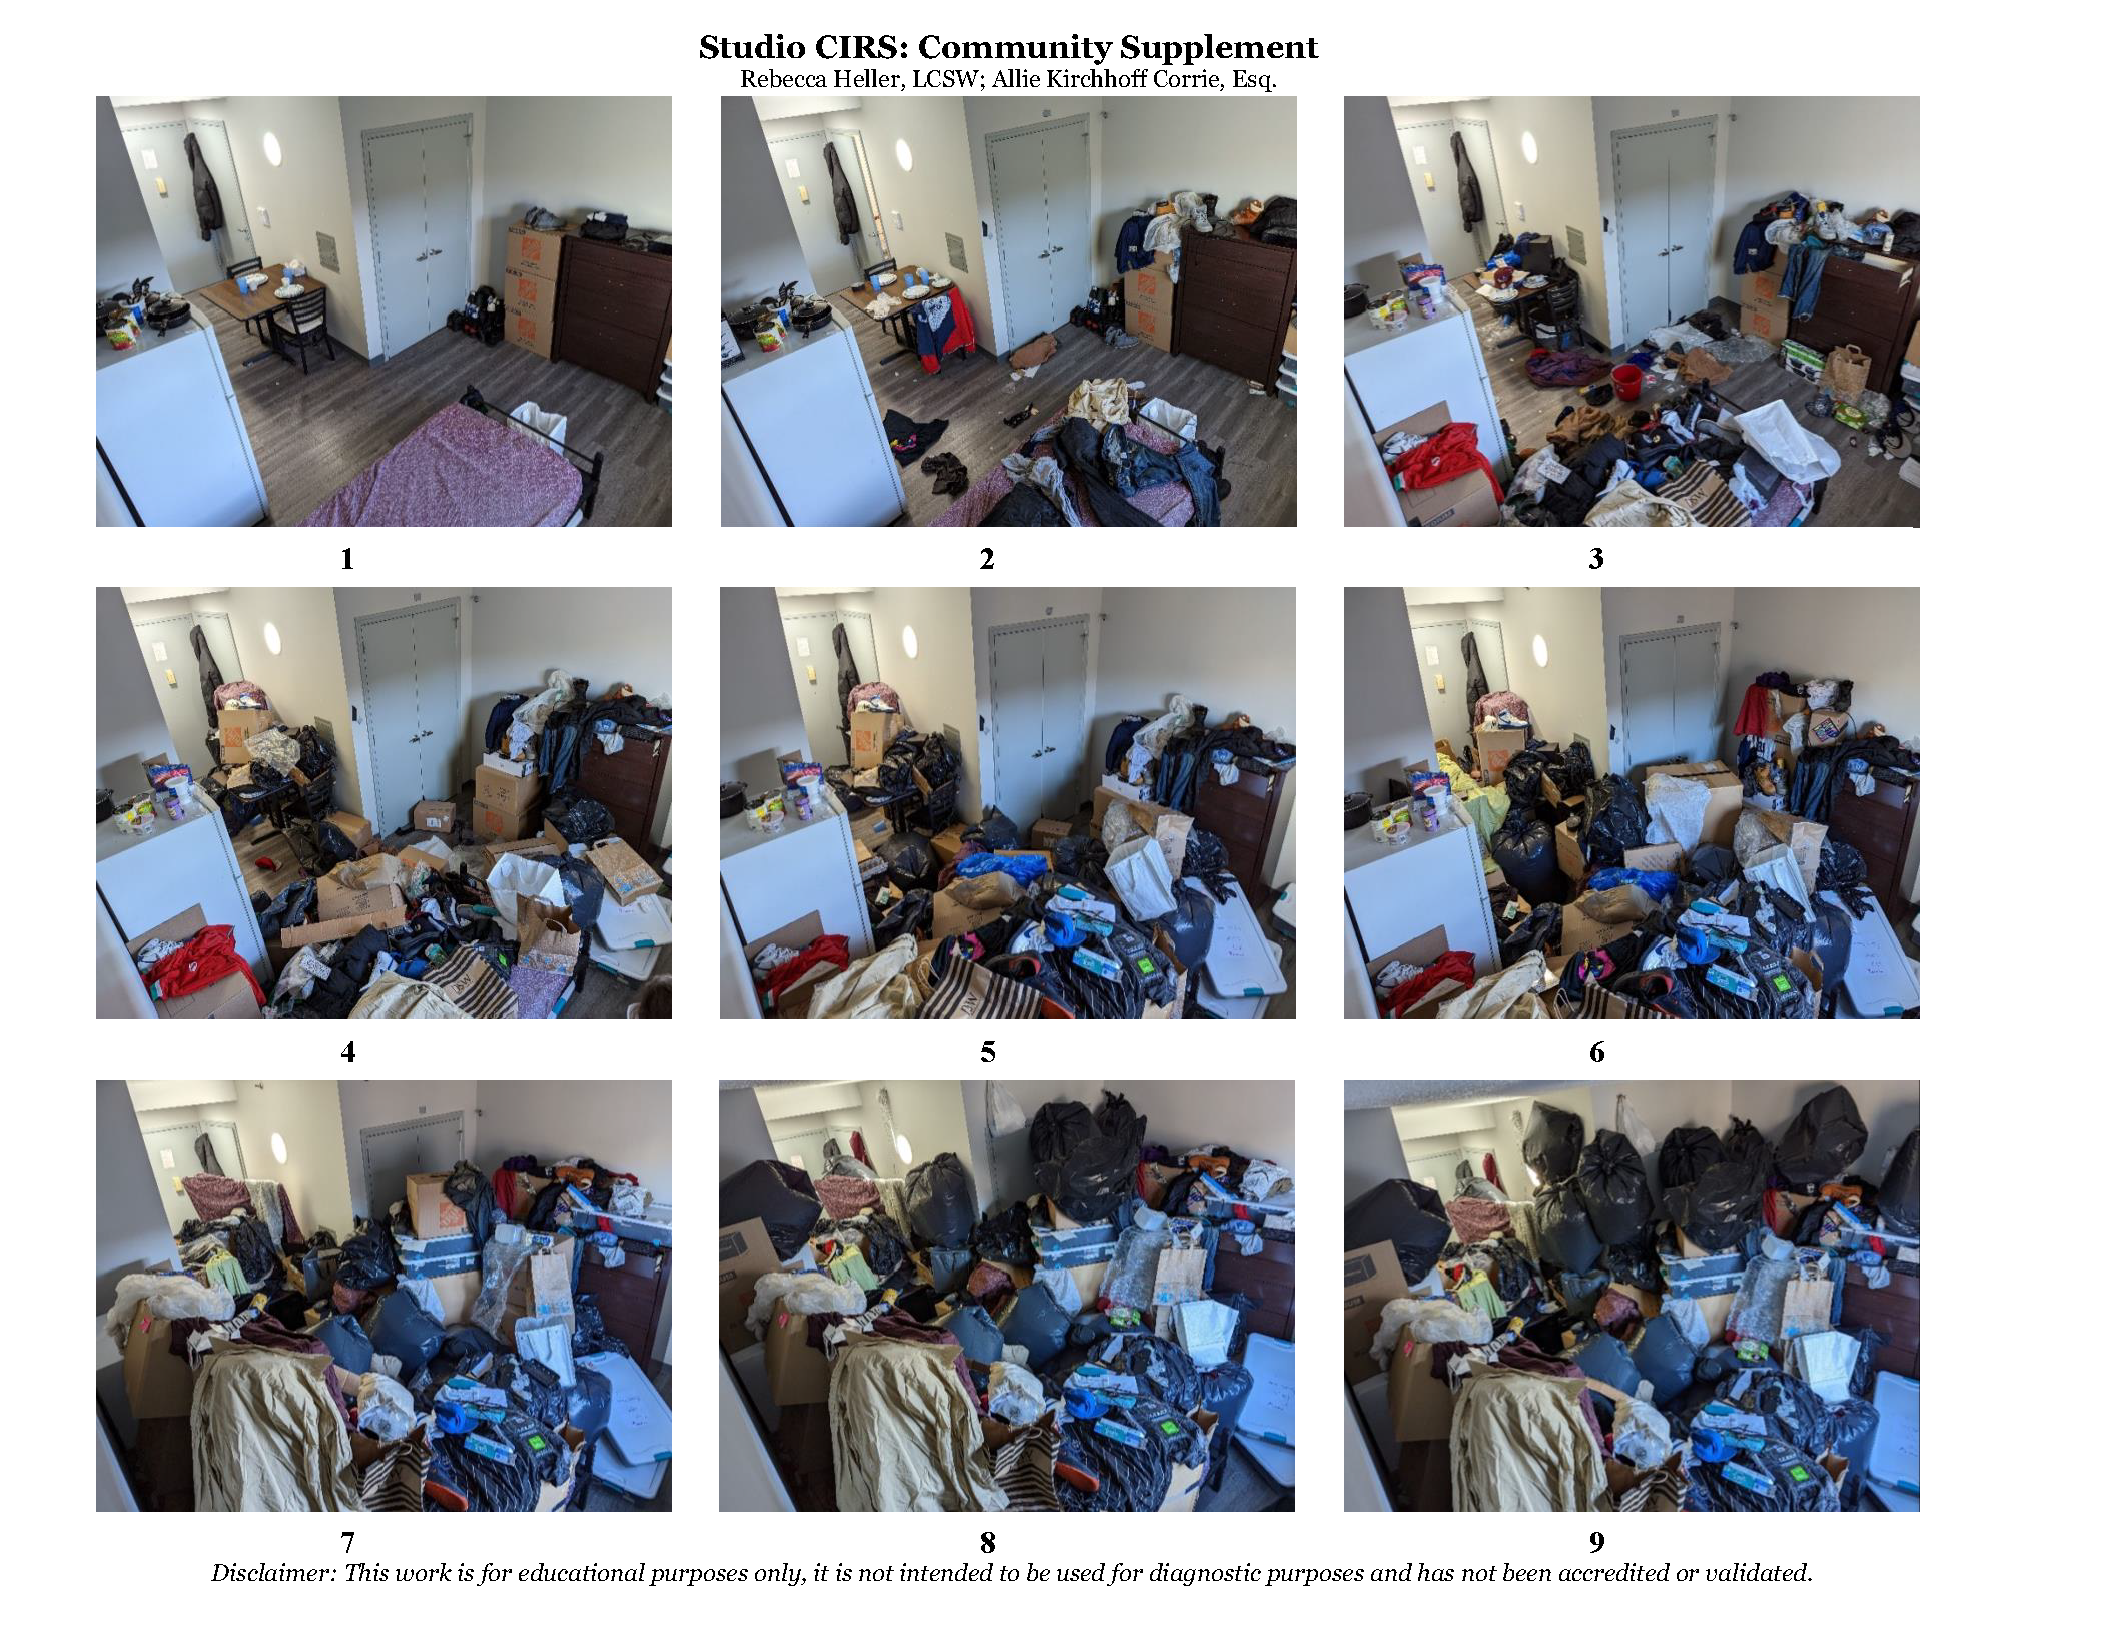 Clutter Image Rating Scale for Studio